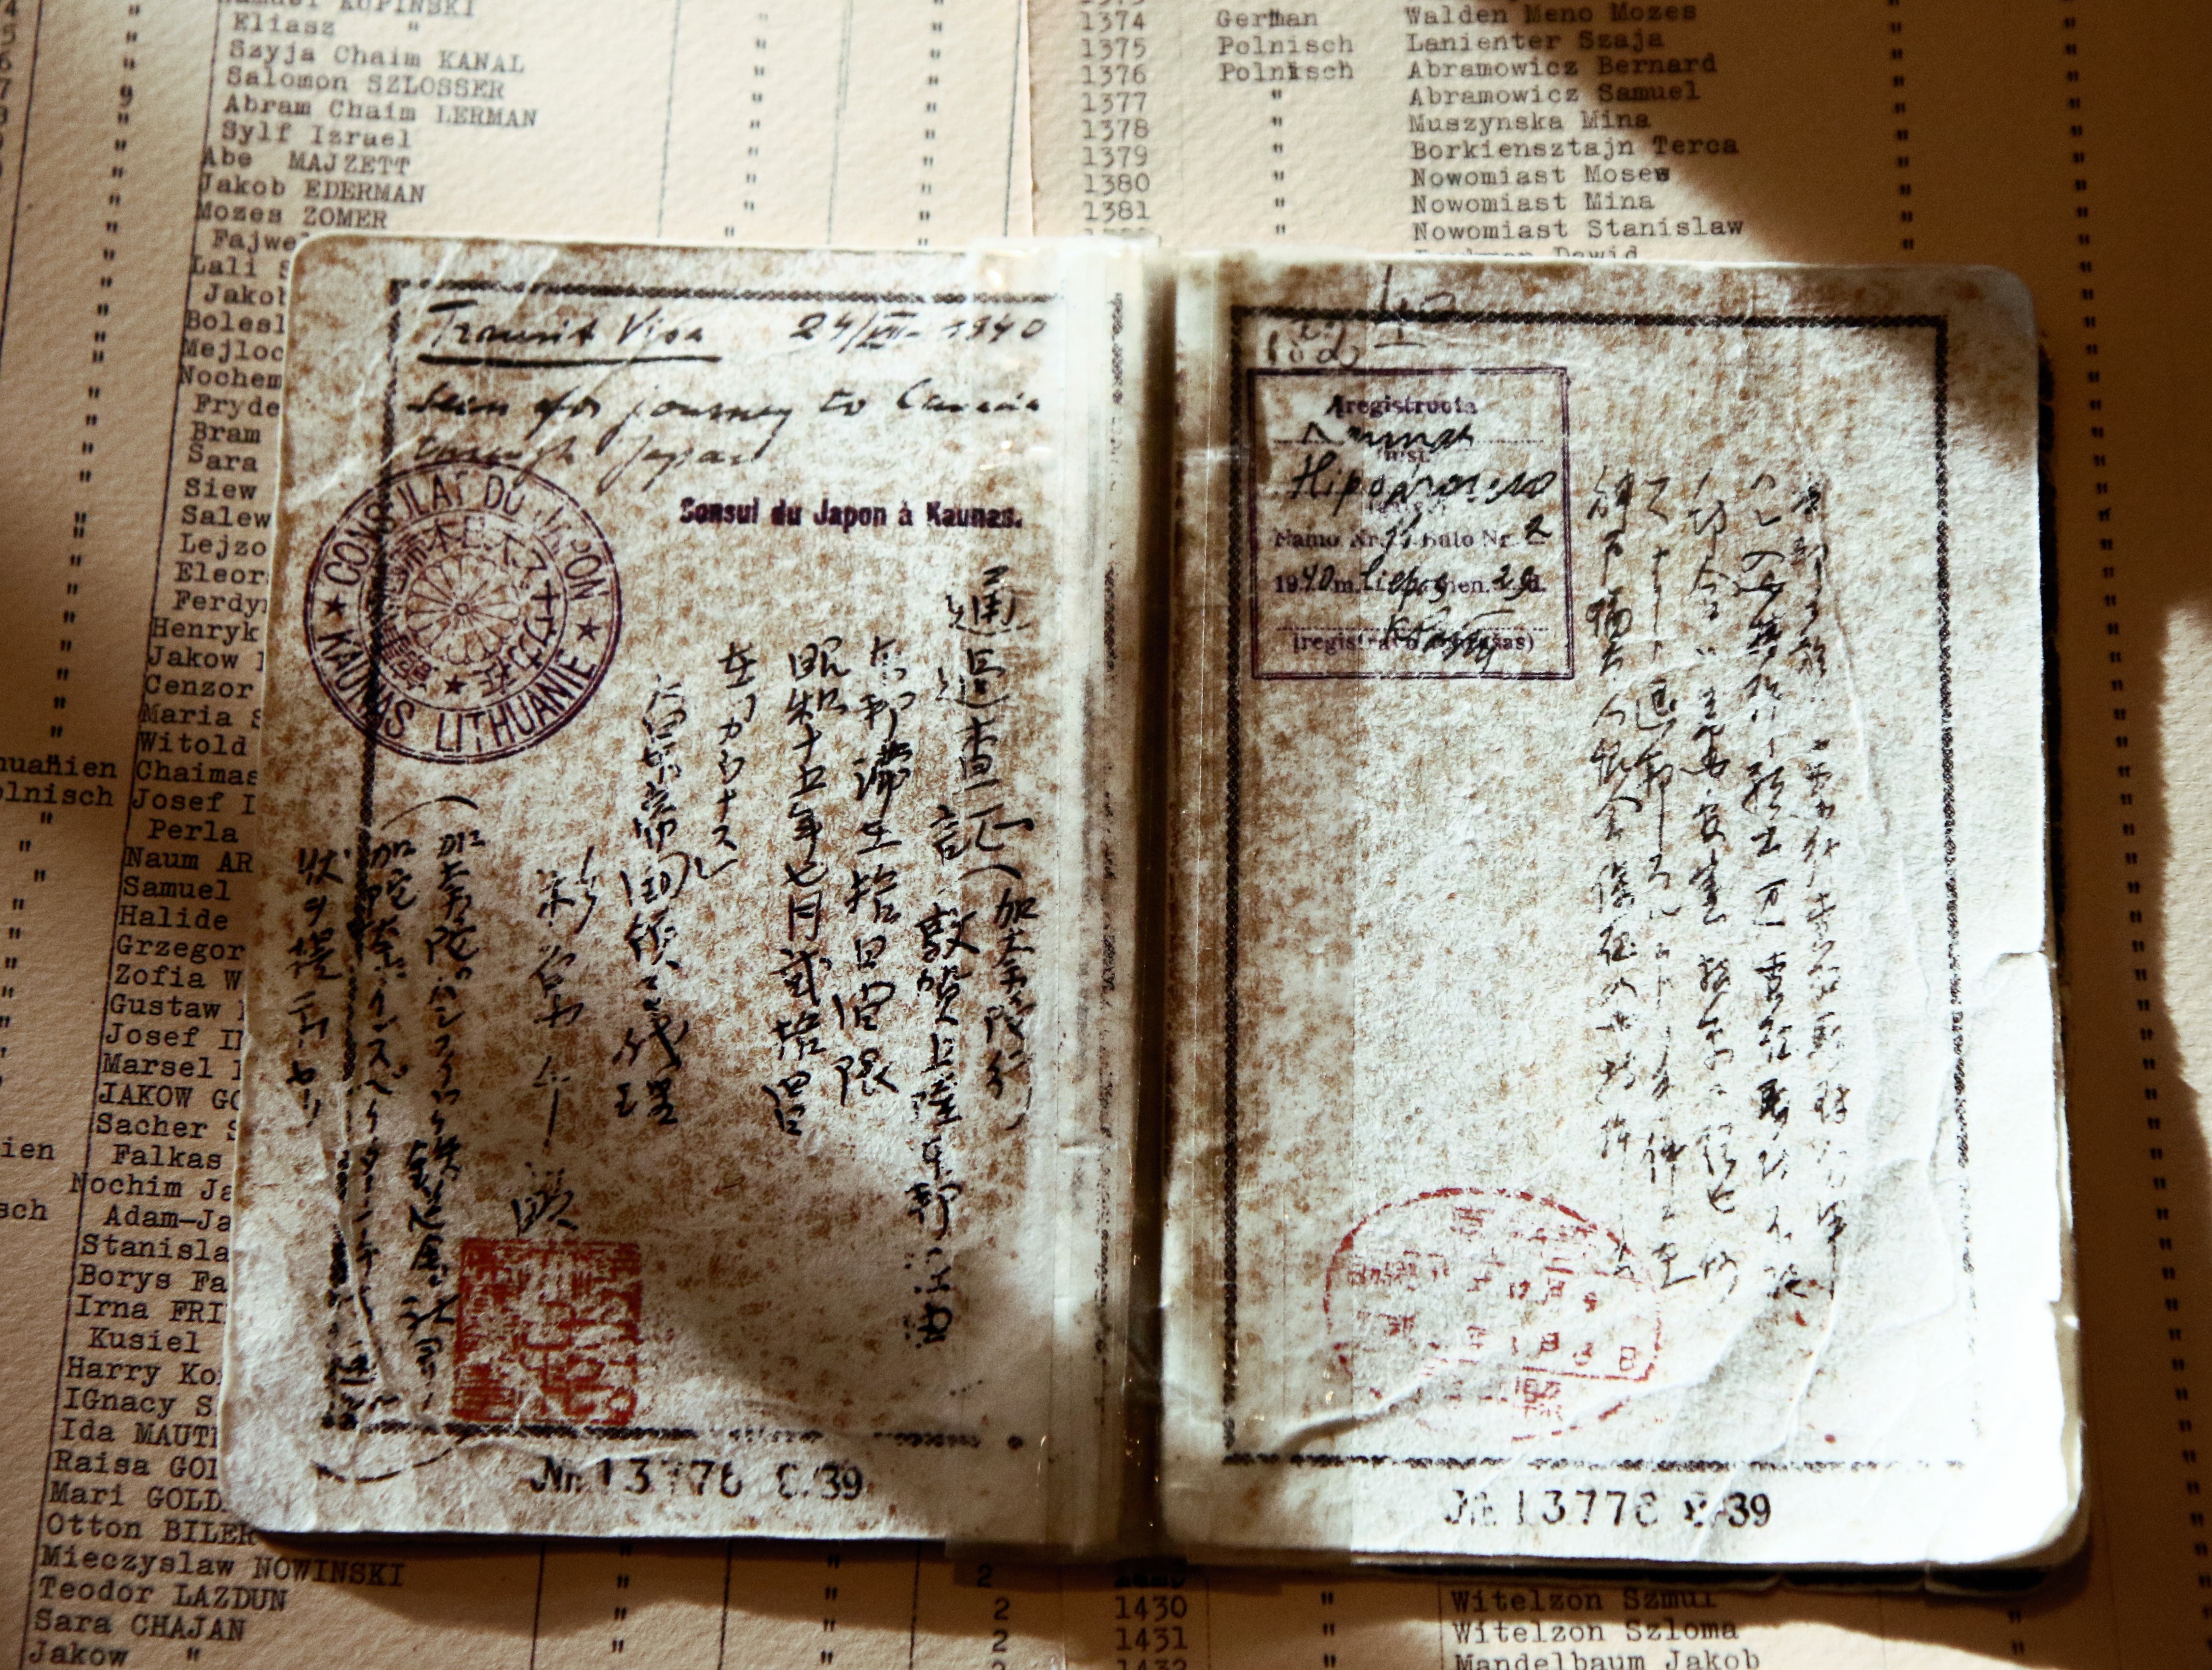 A visa document issued by Sugihara. (Petras Malukas/AFP/Getty Images)